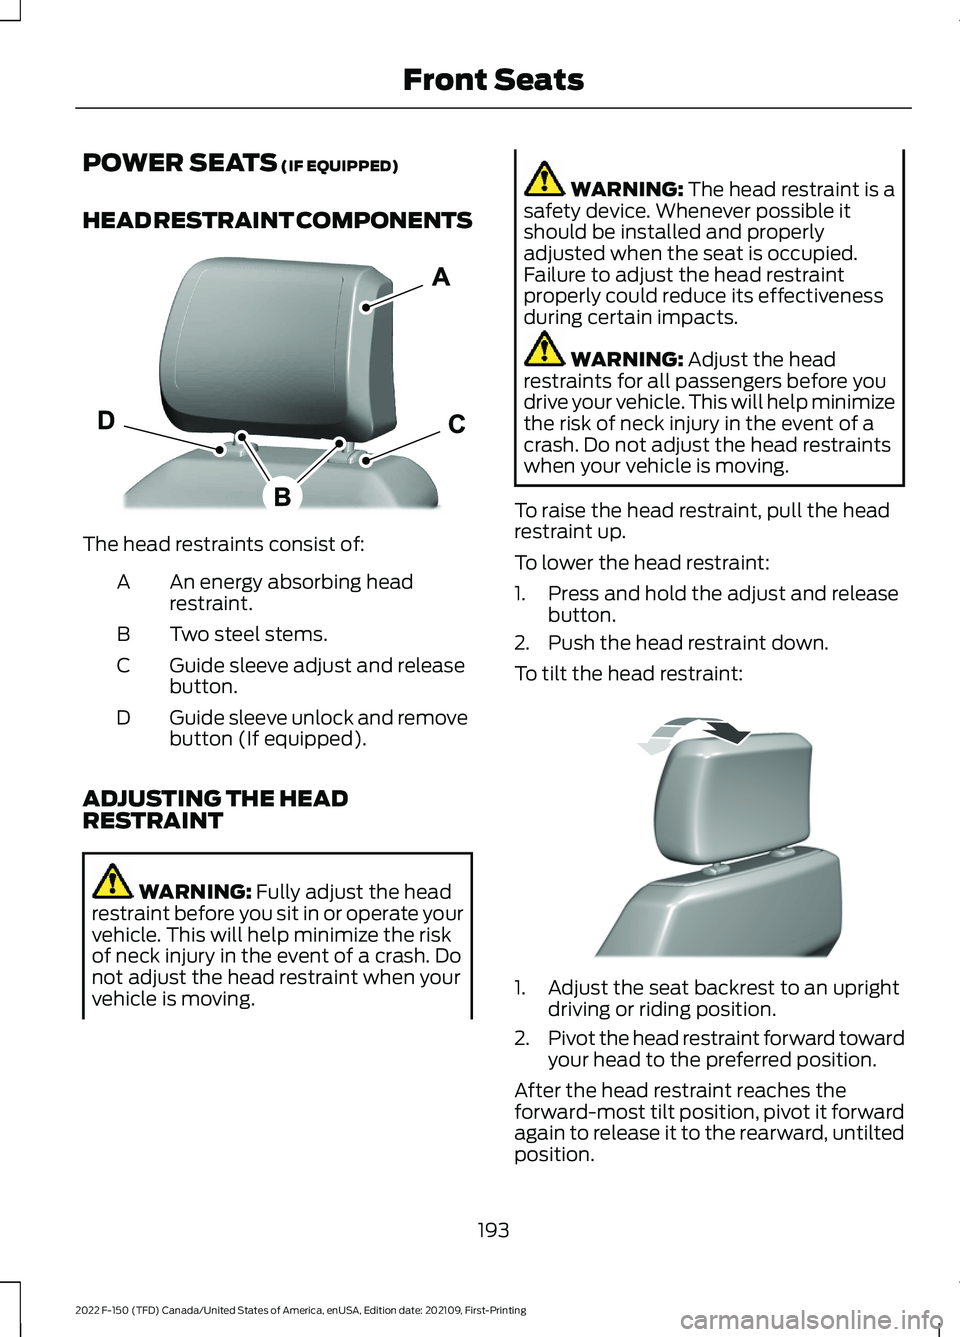 FORD F-150 2022  Owners Manual POWER SEATS (IF EQUIPPED)
HEAD RESTRAINT COMPONENTS The head restraints consist of:
An energy absorbing head
restraint.
A
Two steel stems.
B
Guide sleeve adjust and release
button.
C
Guide sleeve unlo